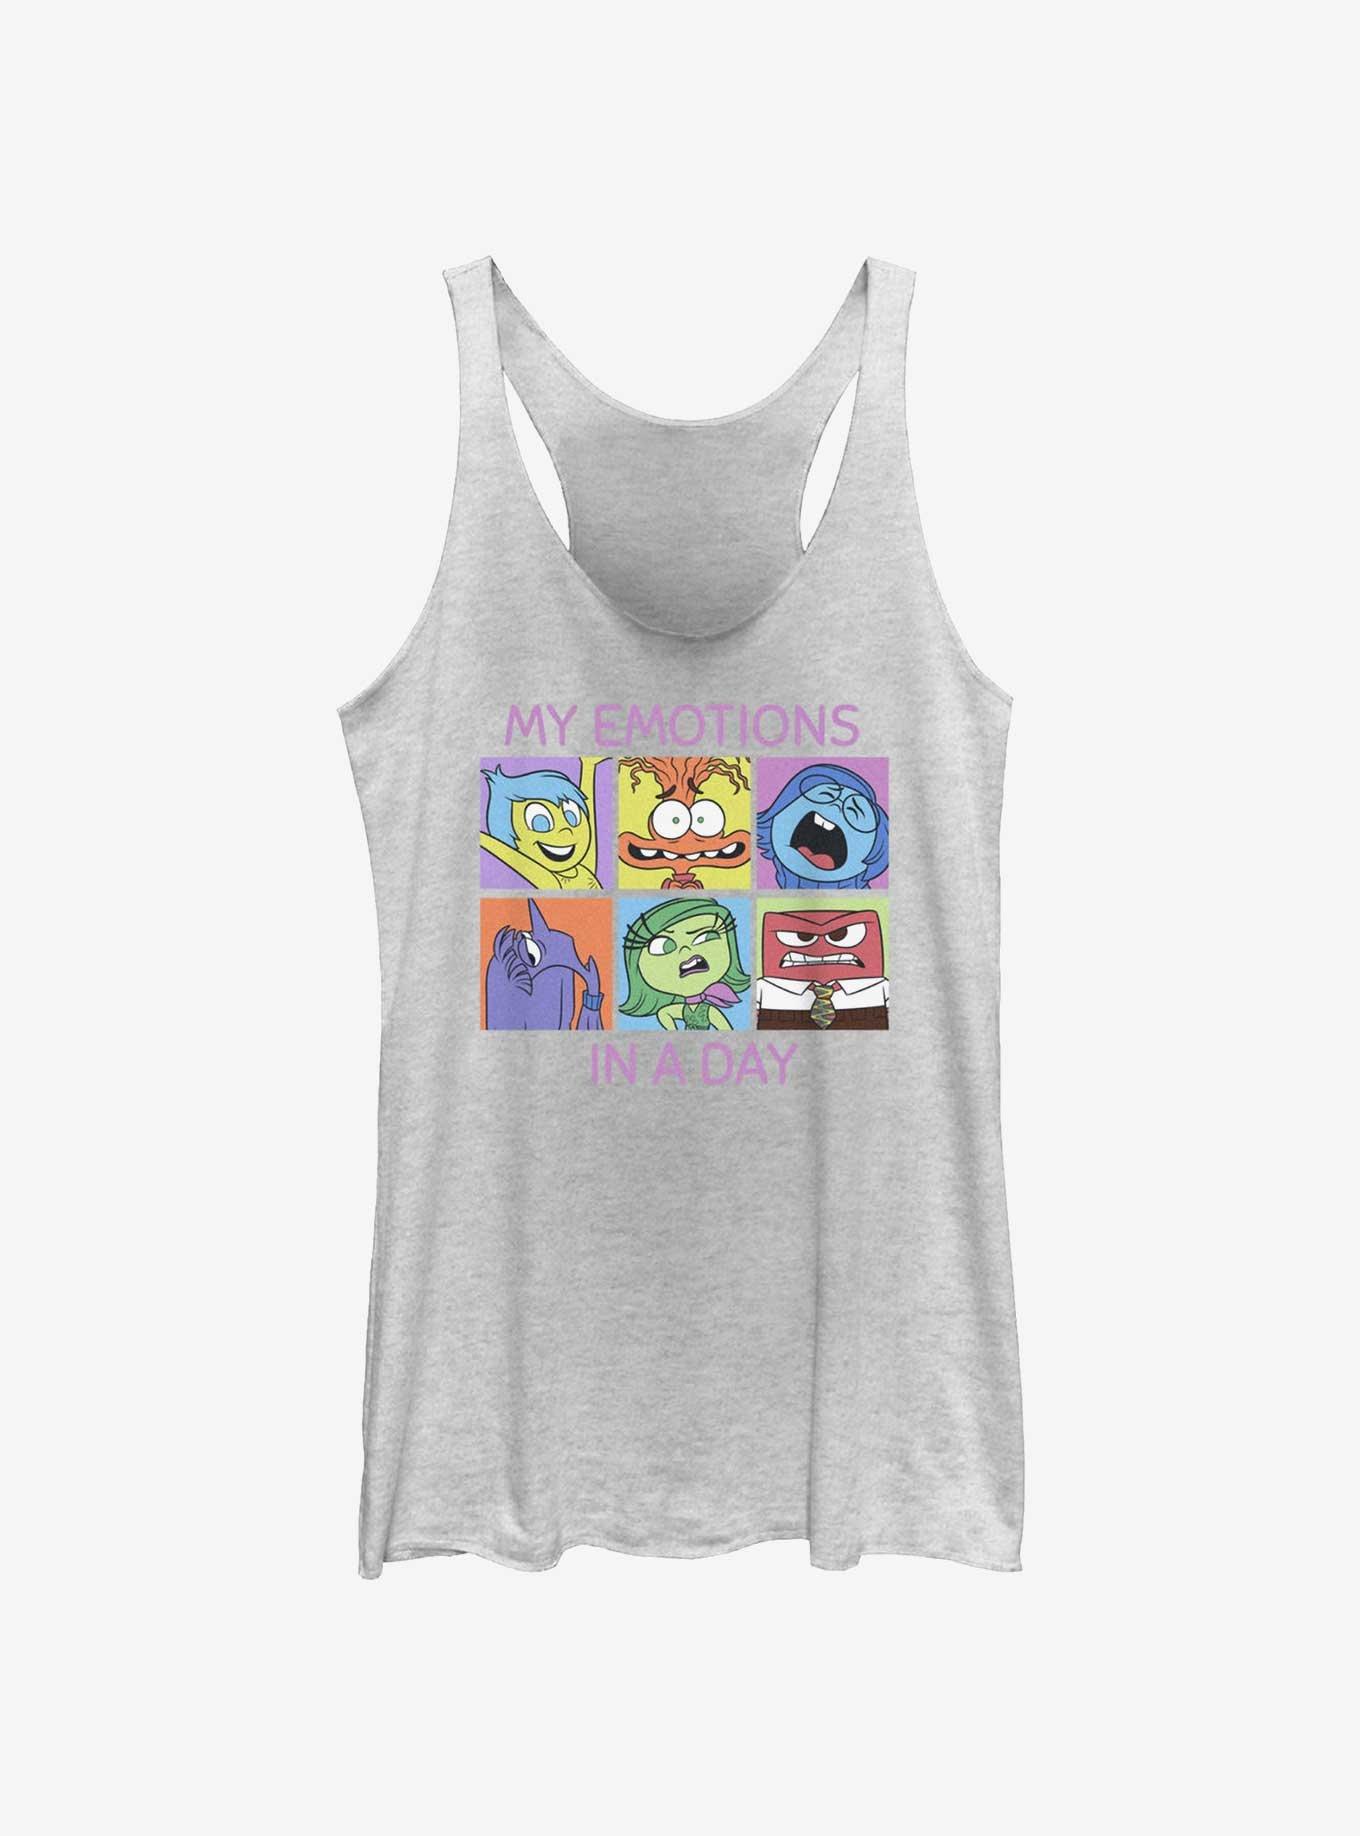 Disney Pixar Inside Out 2 My Emotions In A Day Girls Tank, WHITE HTR, hi-res